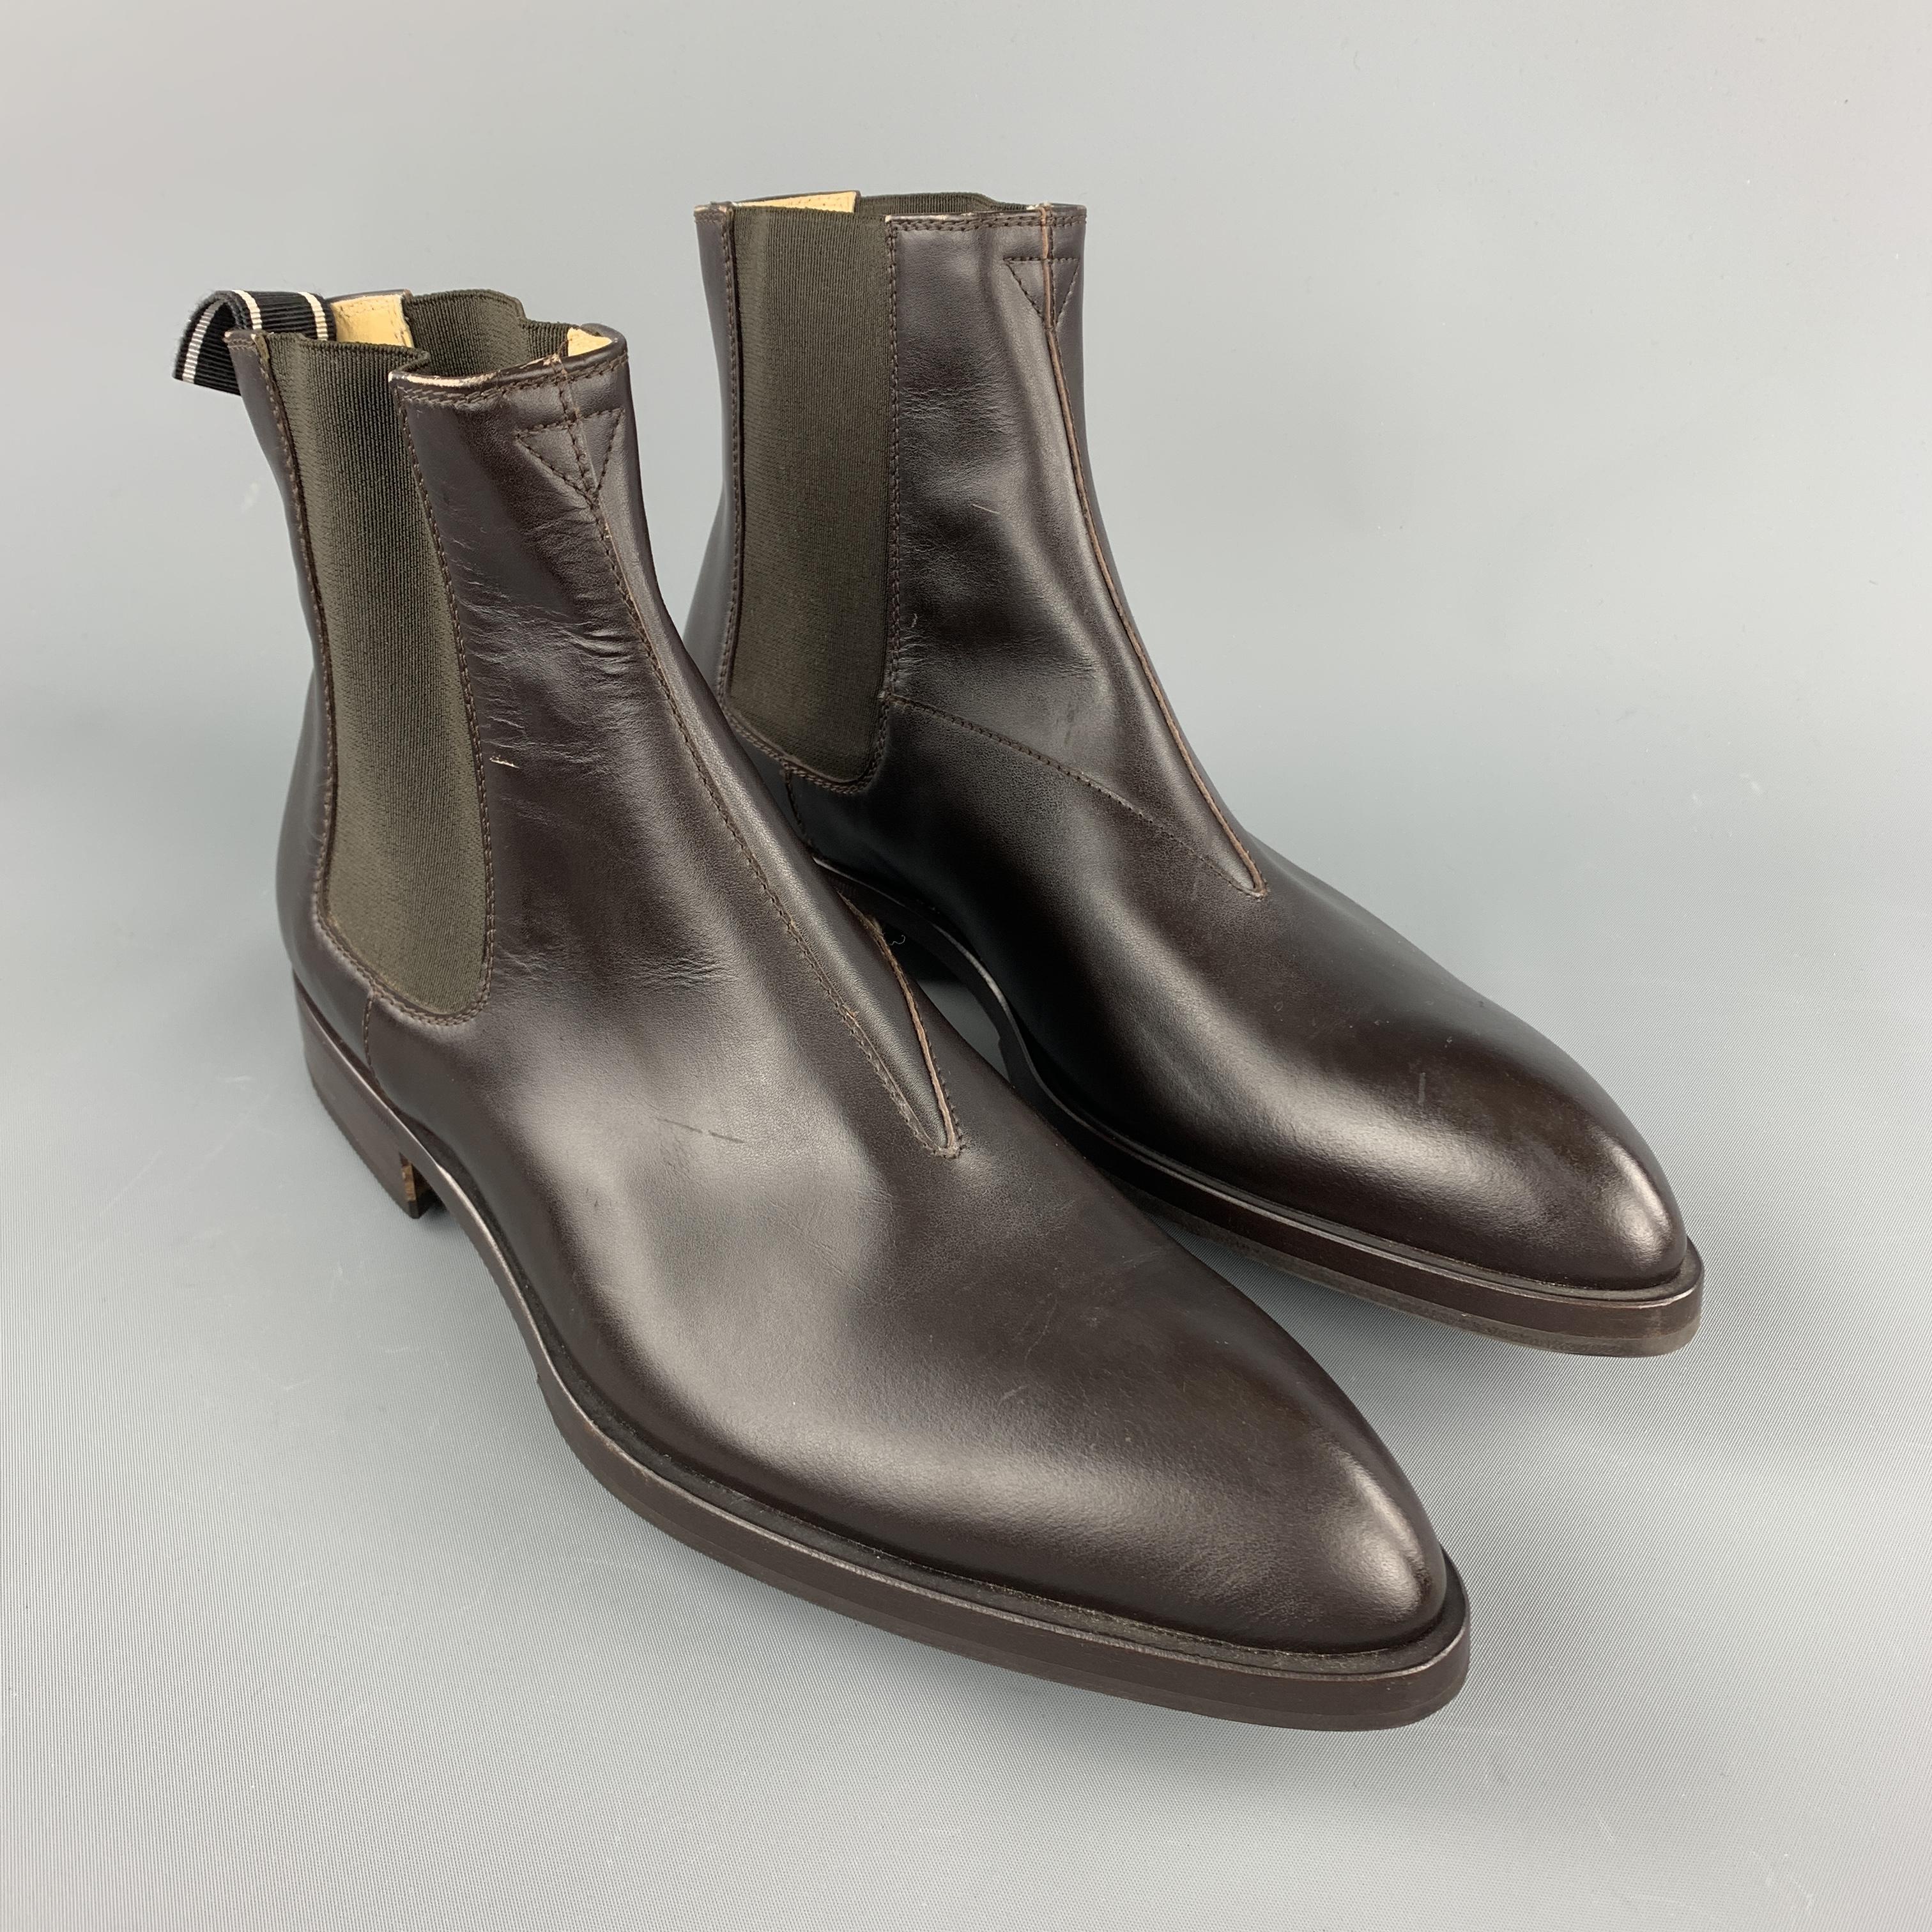 HELMUT LANG Ankle Chelsea Boots comes in a solid brick leather material, with a pointed toe, a trim, pull on. Made in Italy. 

Excellent Pre-Owned Condition.
Marked: UK 6

Measurements:

Length: 12 in.
Width: 4.2 in.
Height: 6.5 in.